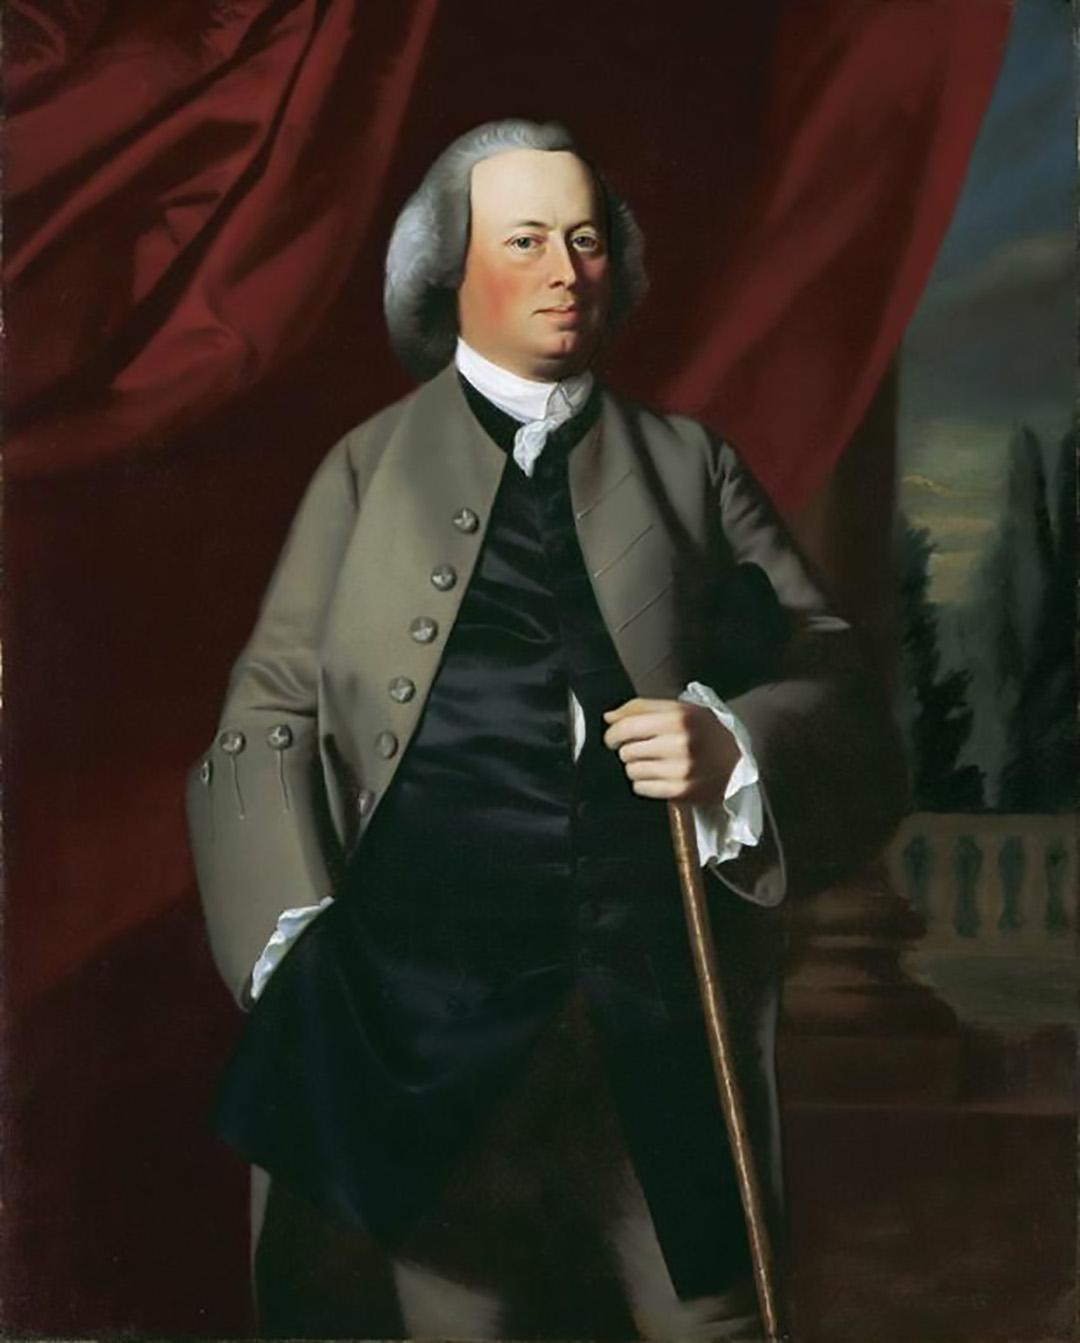 Warren’s husband, James, offered his unstinting support to his wife’s vocation. Portrait, 1763, by John Singleton Copley. Museum of Fine Arts Boston. (Public Domain)